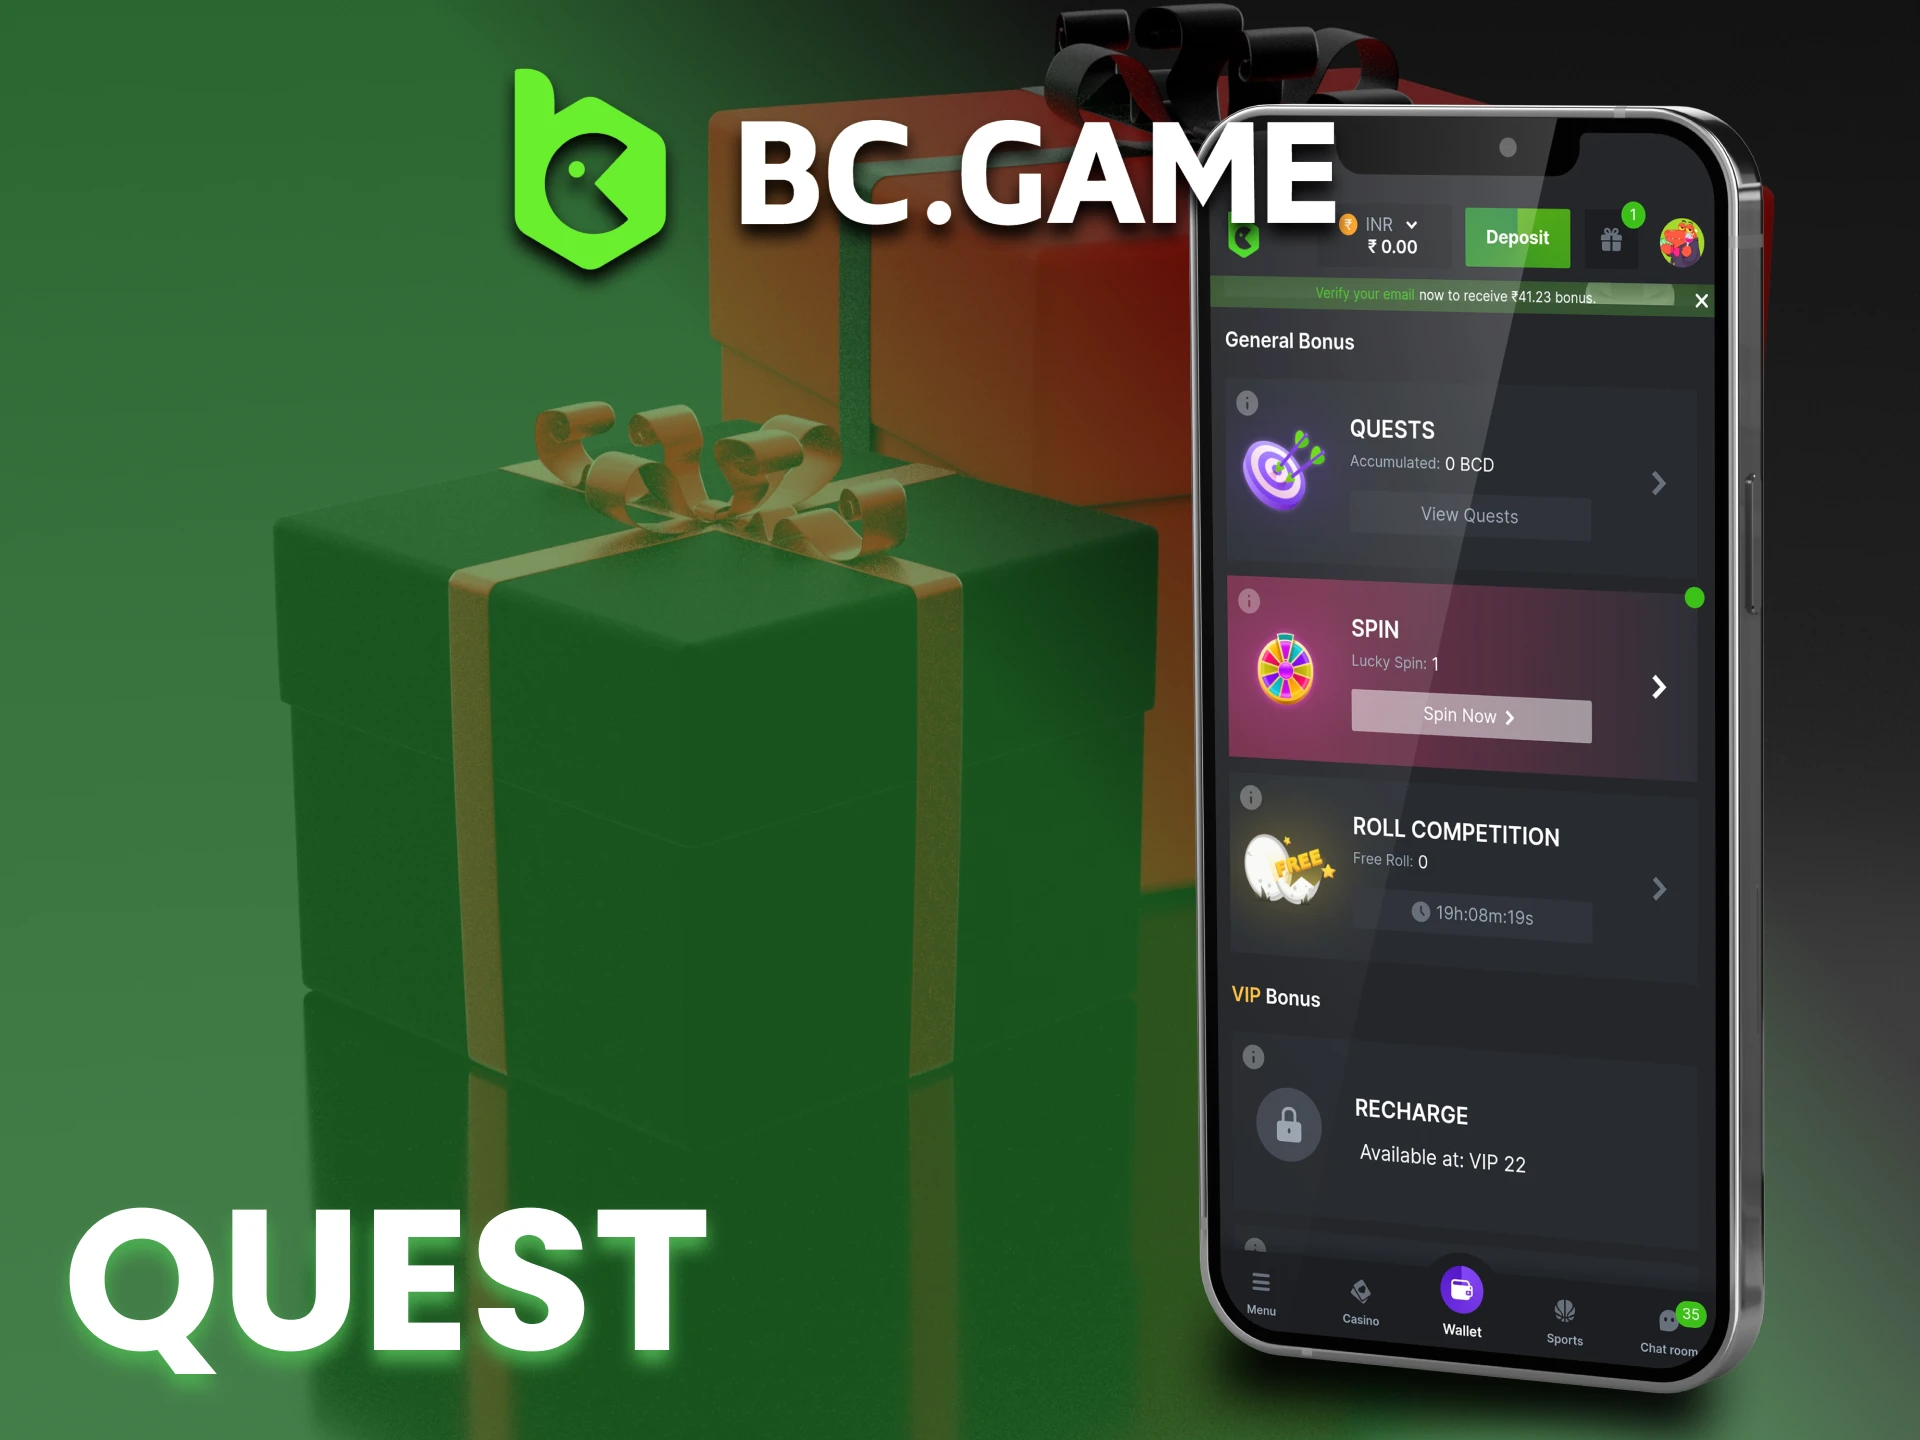 Complete simple quests in BC Game app and get bonuses.